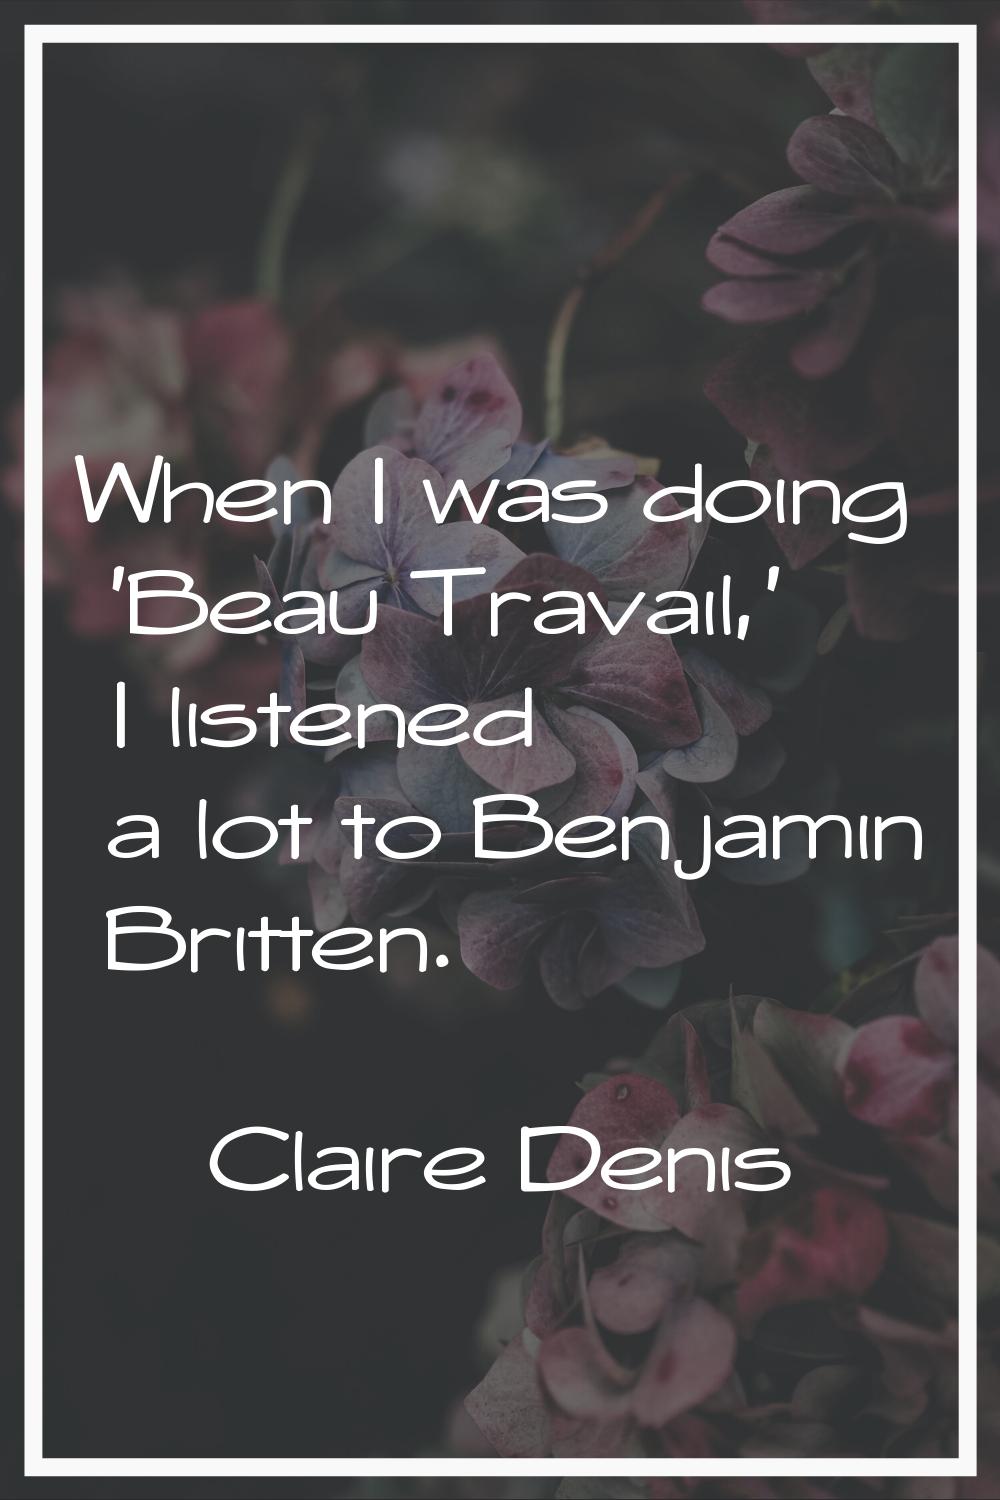 When I was doing 'Beau Travail,' I listened a lot to Benjamin Britten.